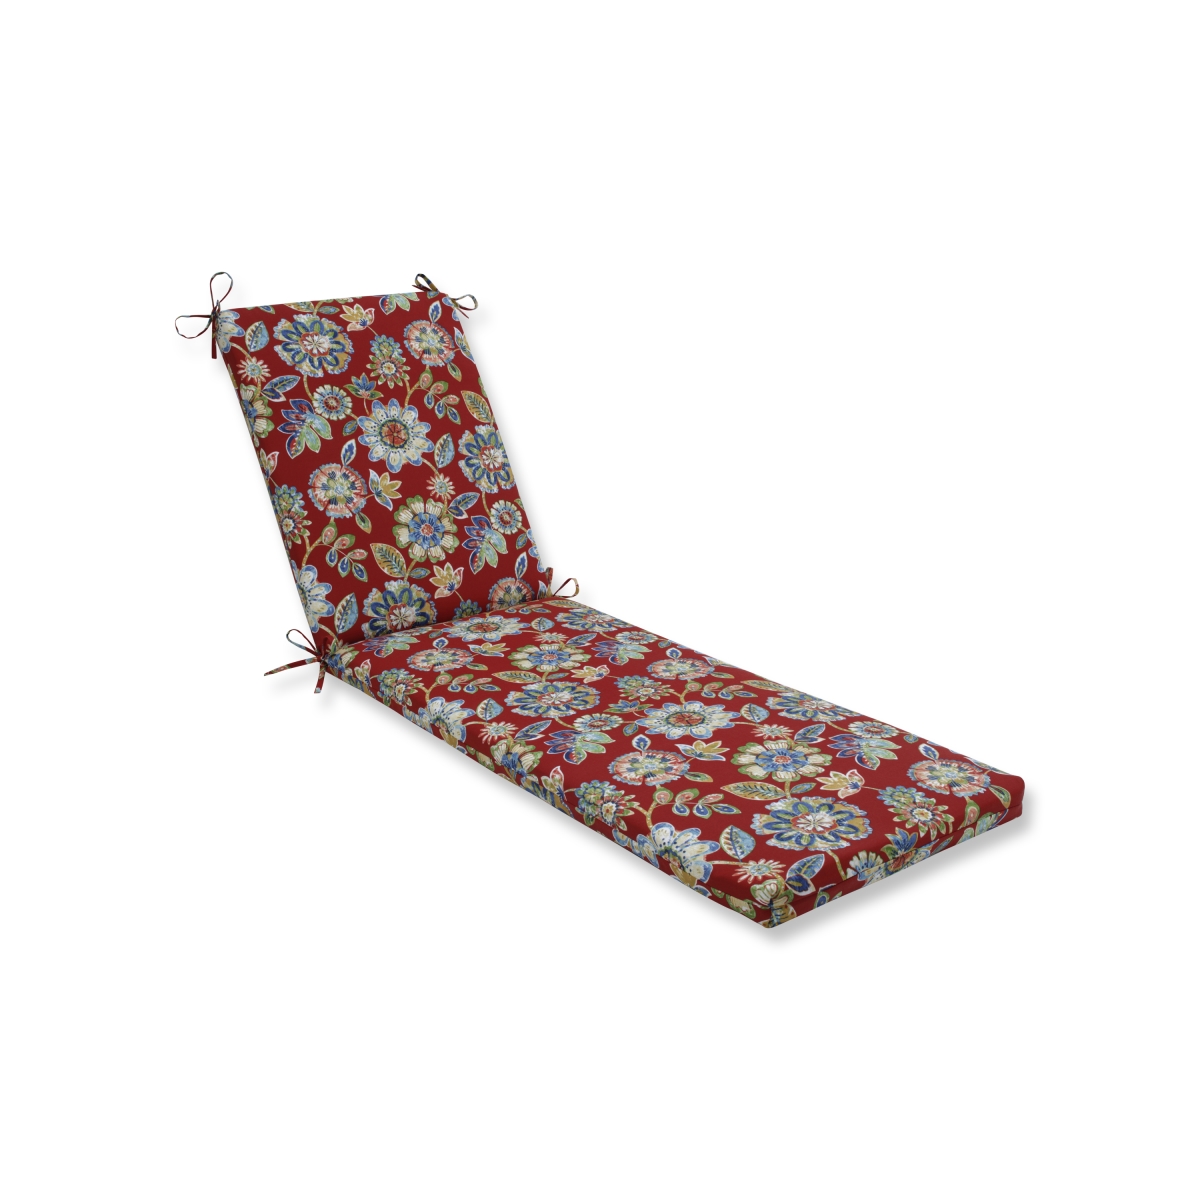 80 X 23 X 3 In. Outdoor & Indoor Daelyn Cherry Chaise Lounge Cushion, Red